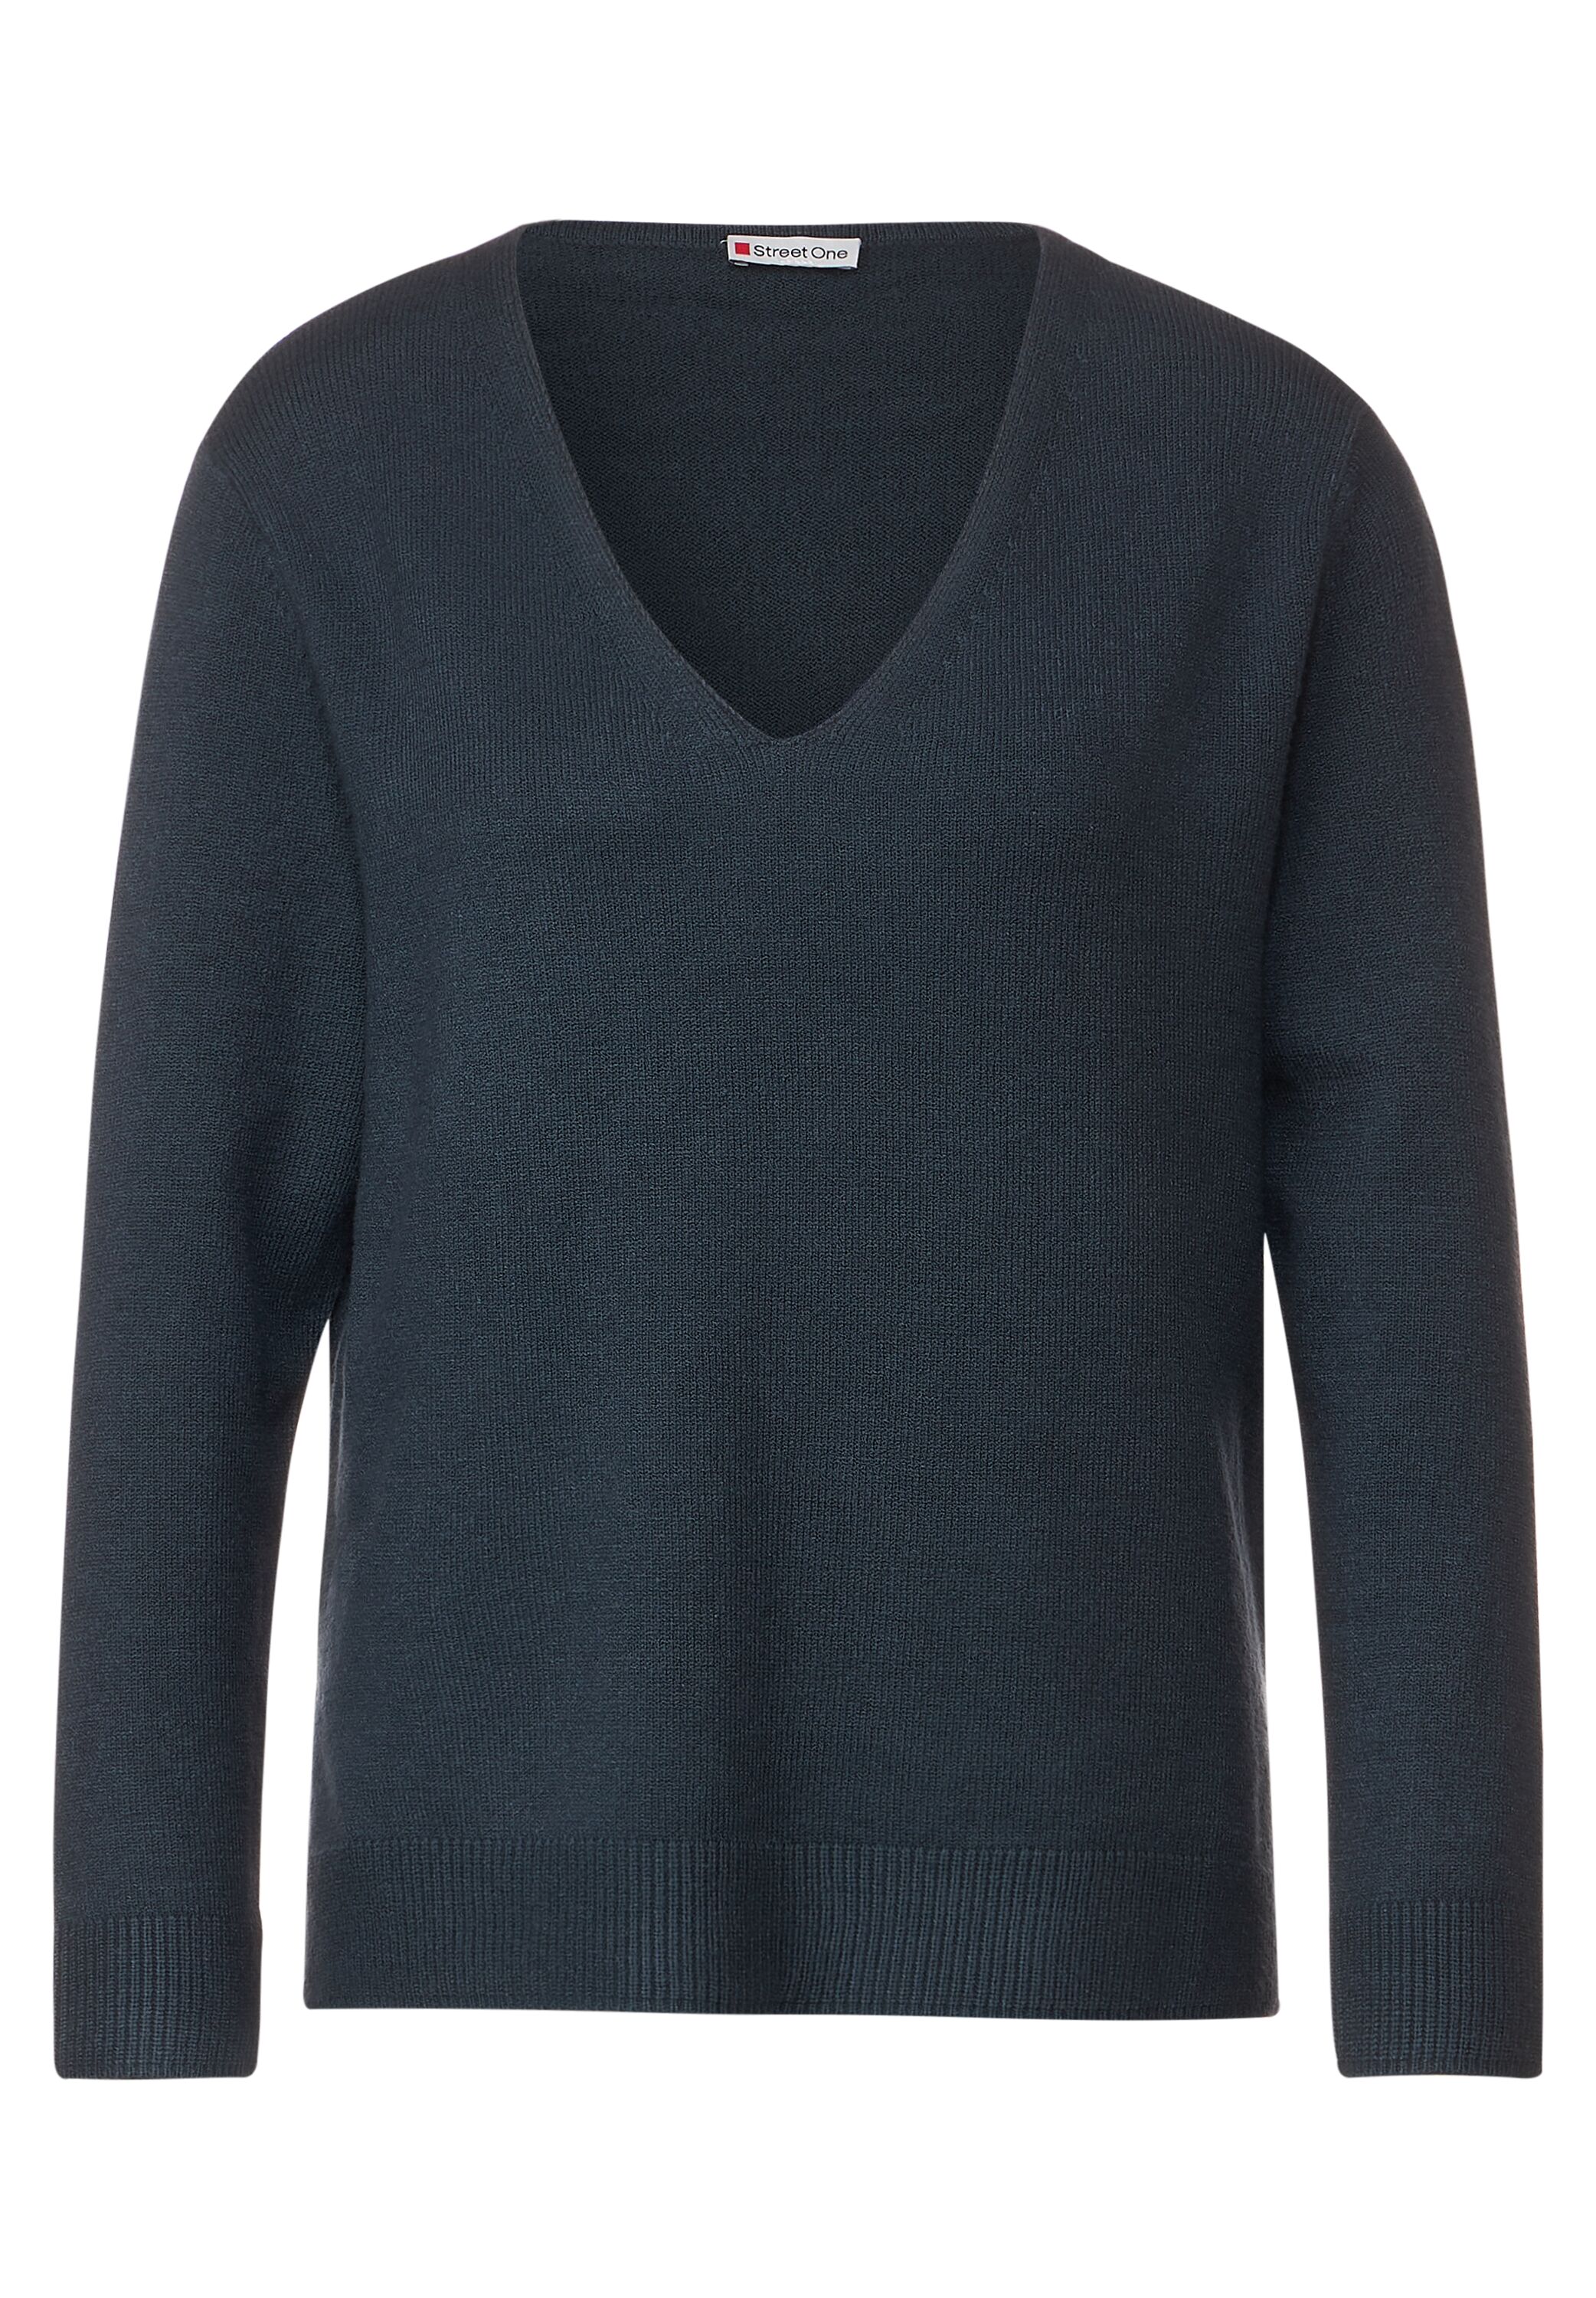 in Vintage Cool im Green Street reduziert - A302343-13825 One Pullover Mode SALE CONCEPT